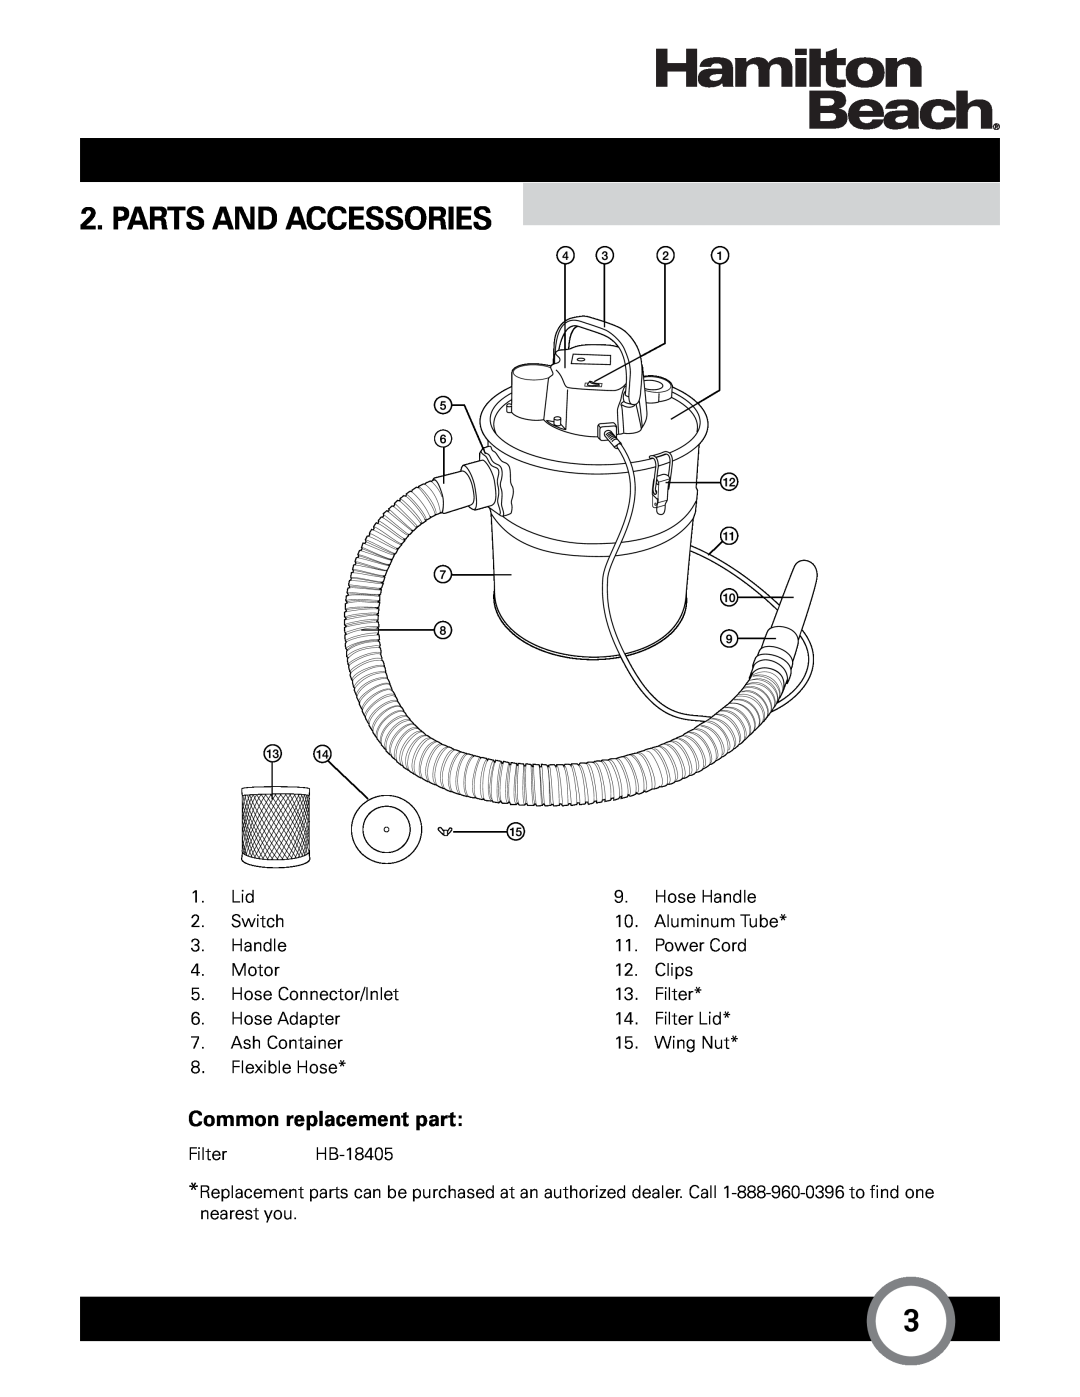 Hamilton Beach HB-405 owner manual Parts And Accessories, Common replacement part 